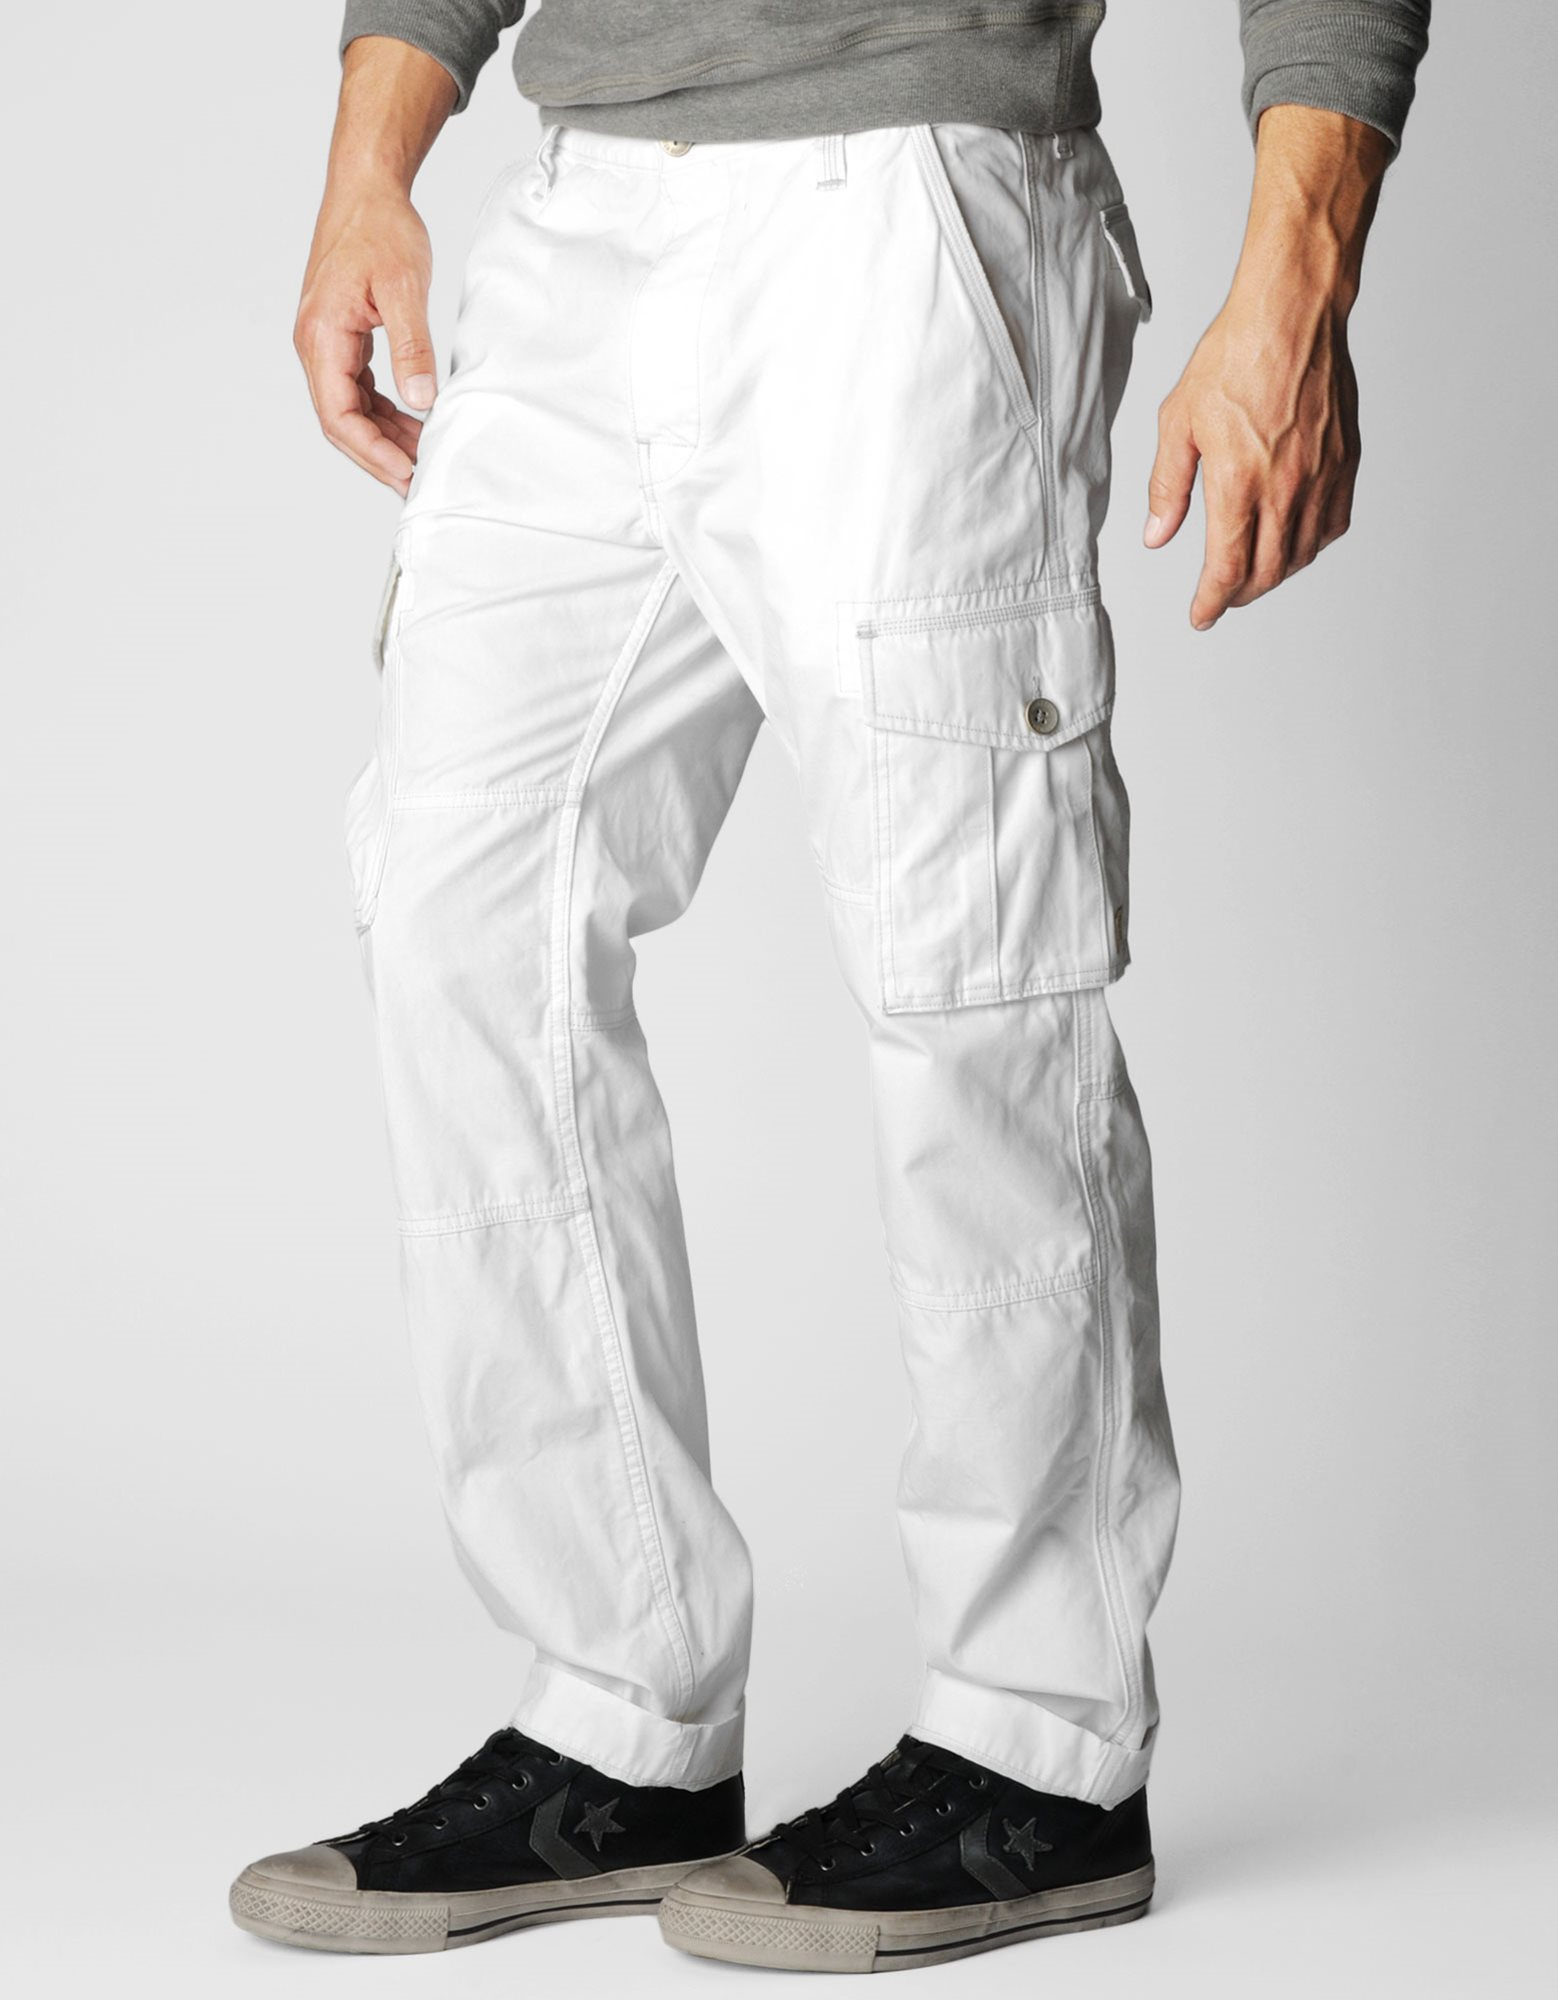 Relaxed Fit Cargo Pants - Cream - Men | H&M US